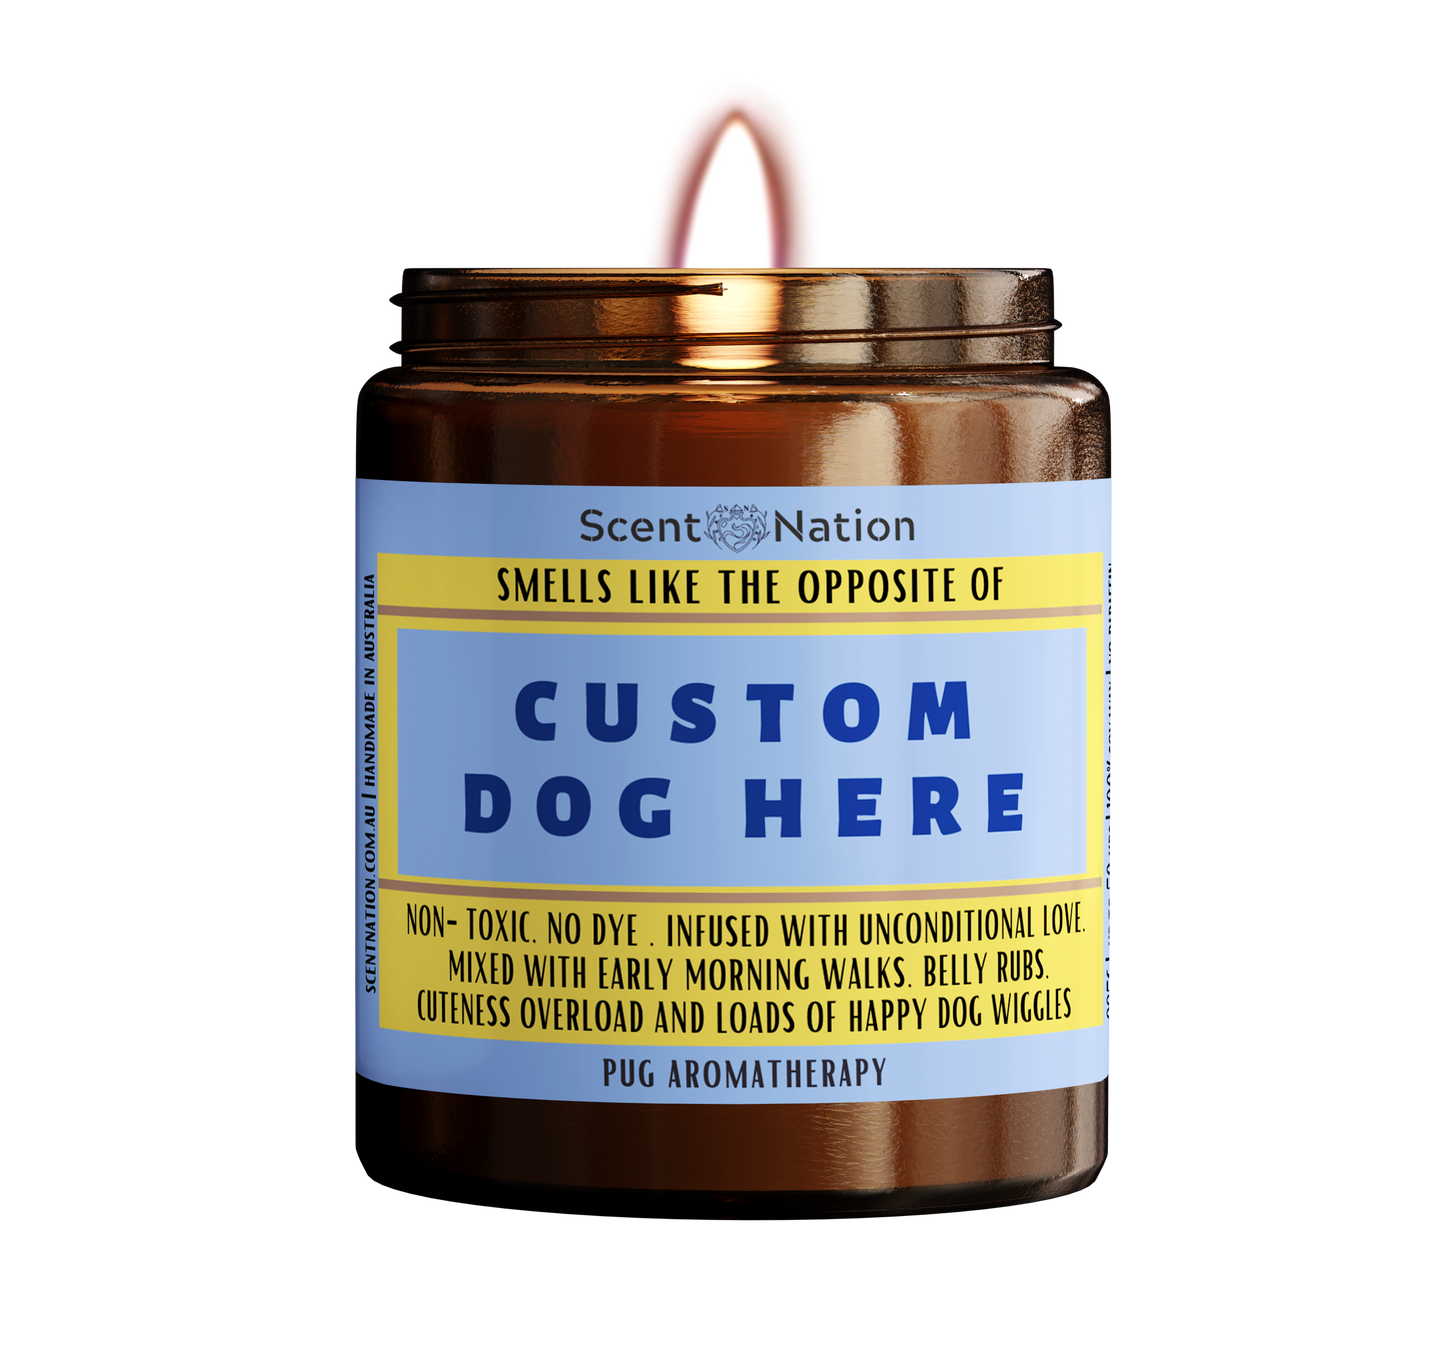 German Shepherd Gifts-Funny Dog Gifts for Dog Lovers.